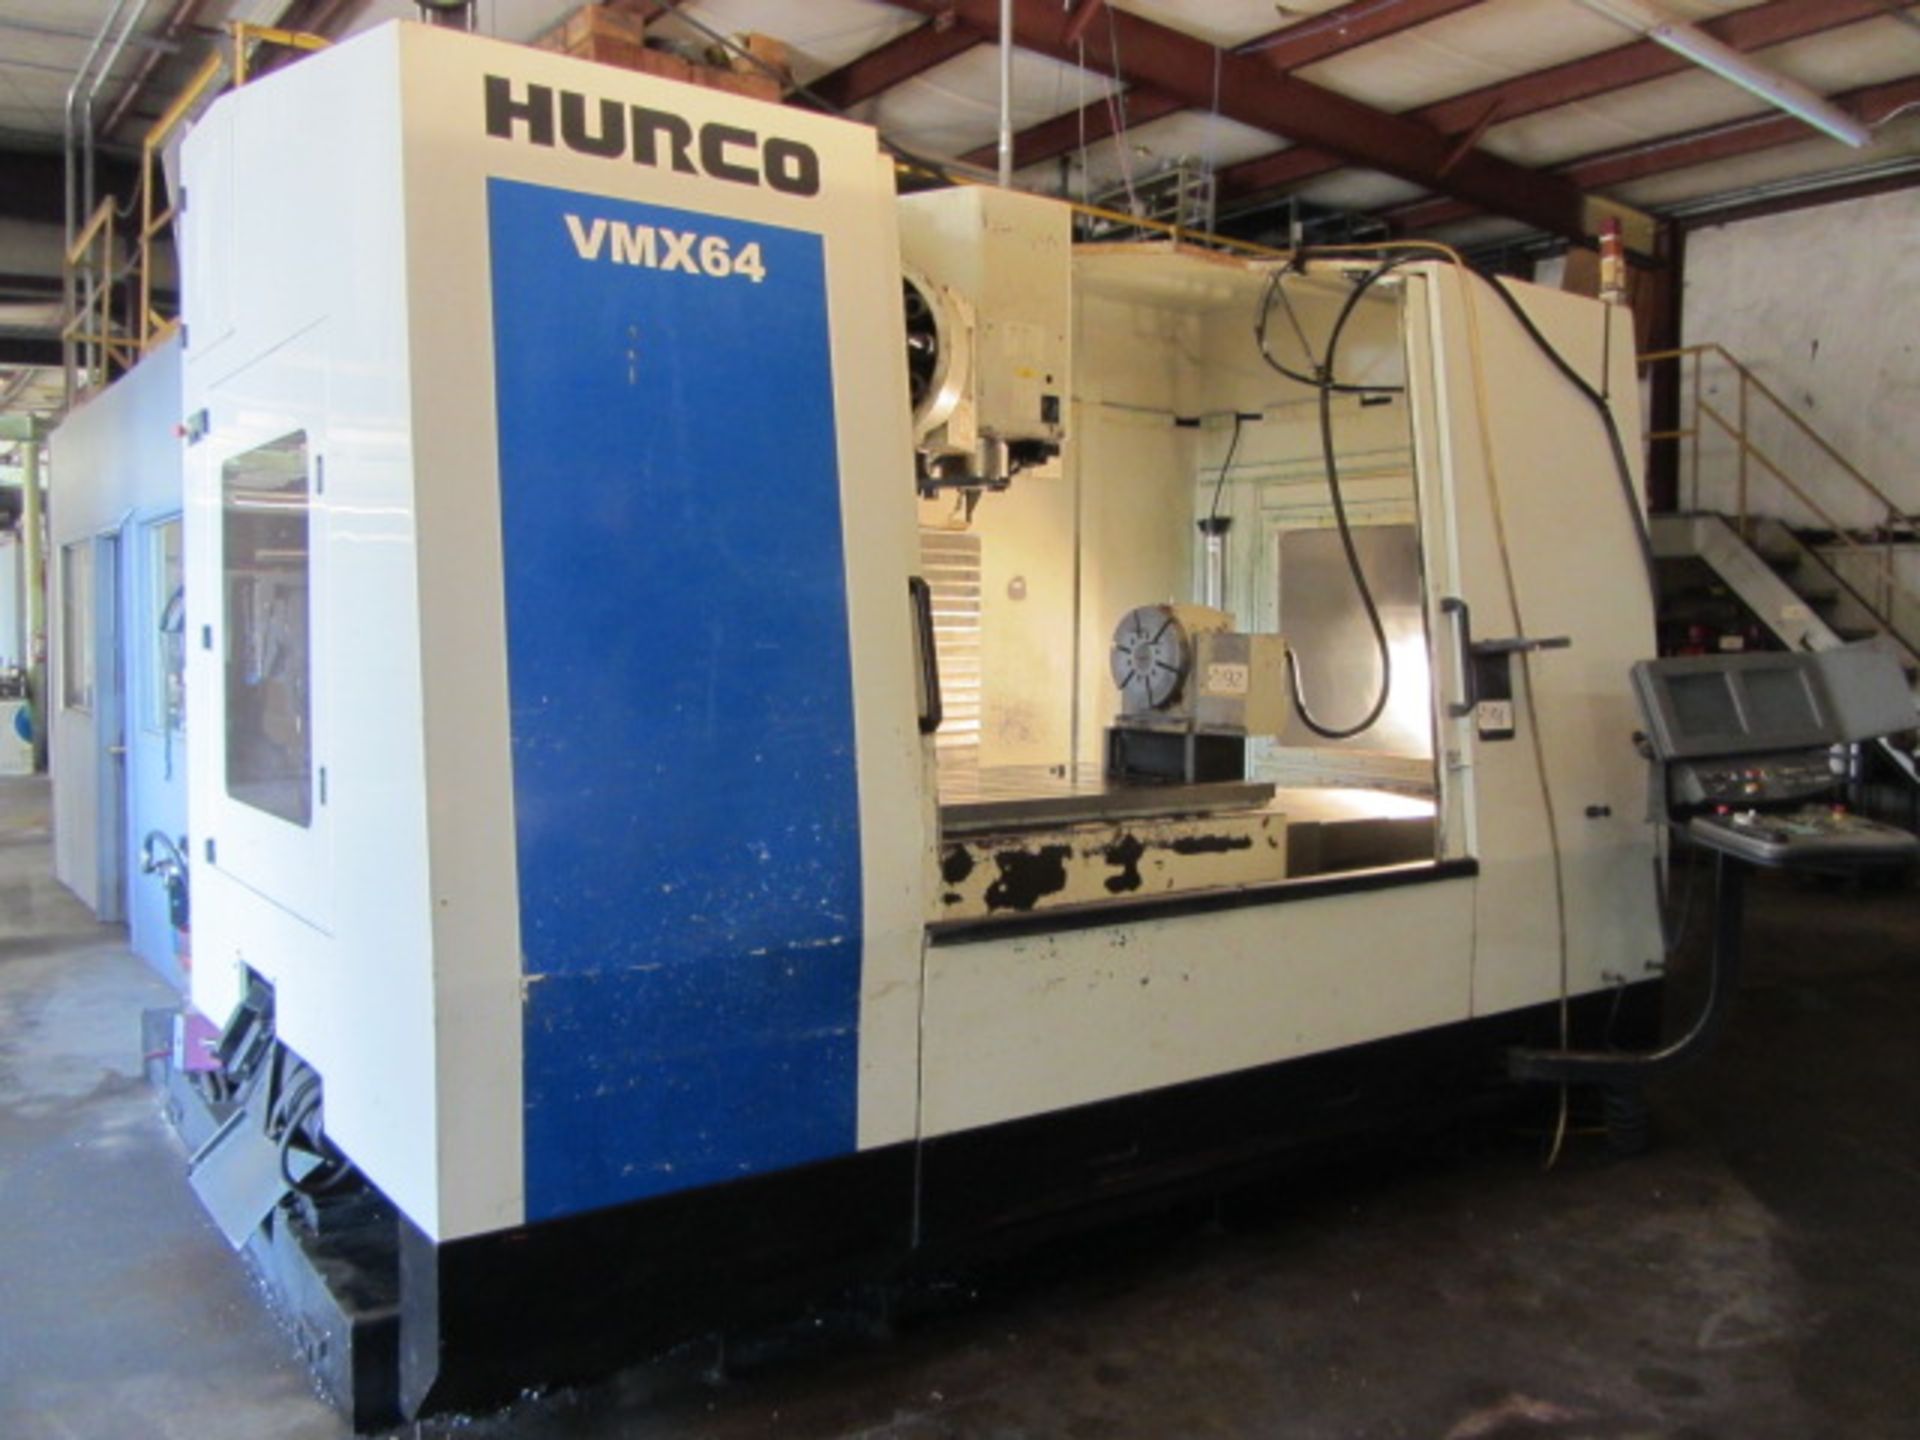 Hurco Model VMX 64-40 CNC Vertical Machining Center with 60'' x 36'' Table, 64'' X-Axis, 34'' Y-